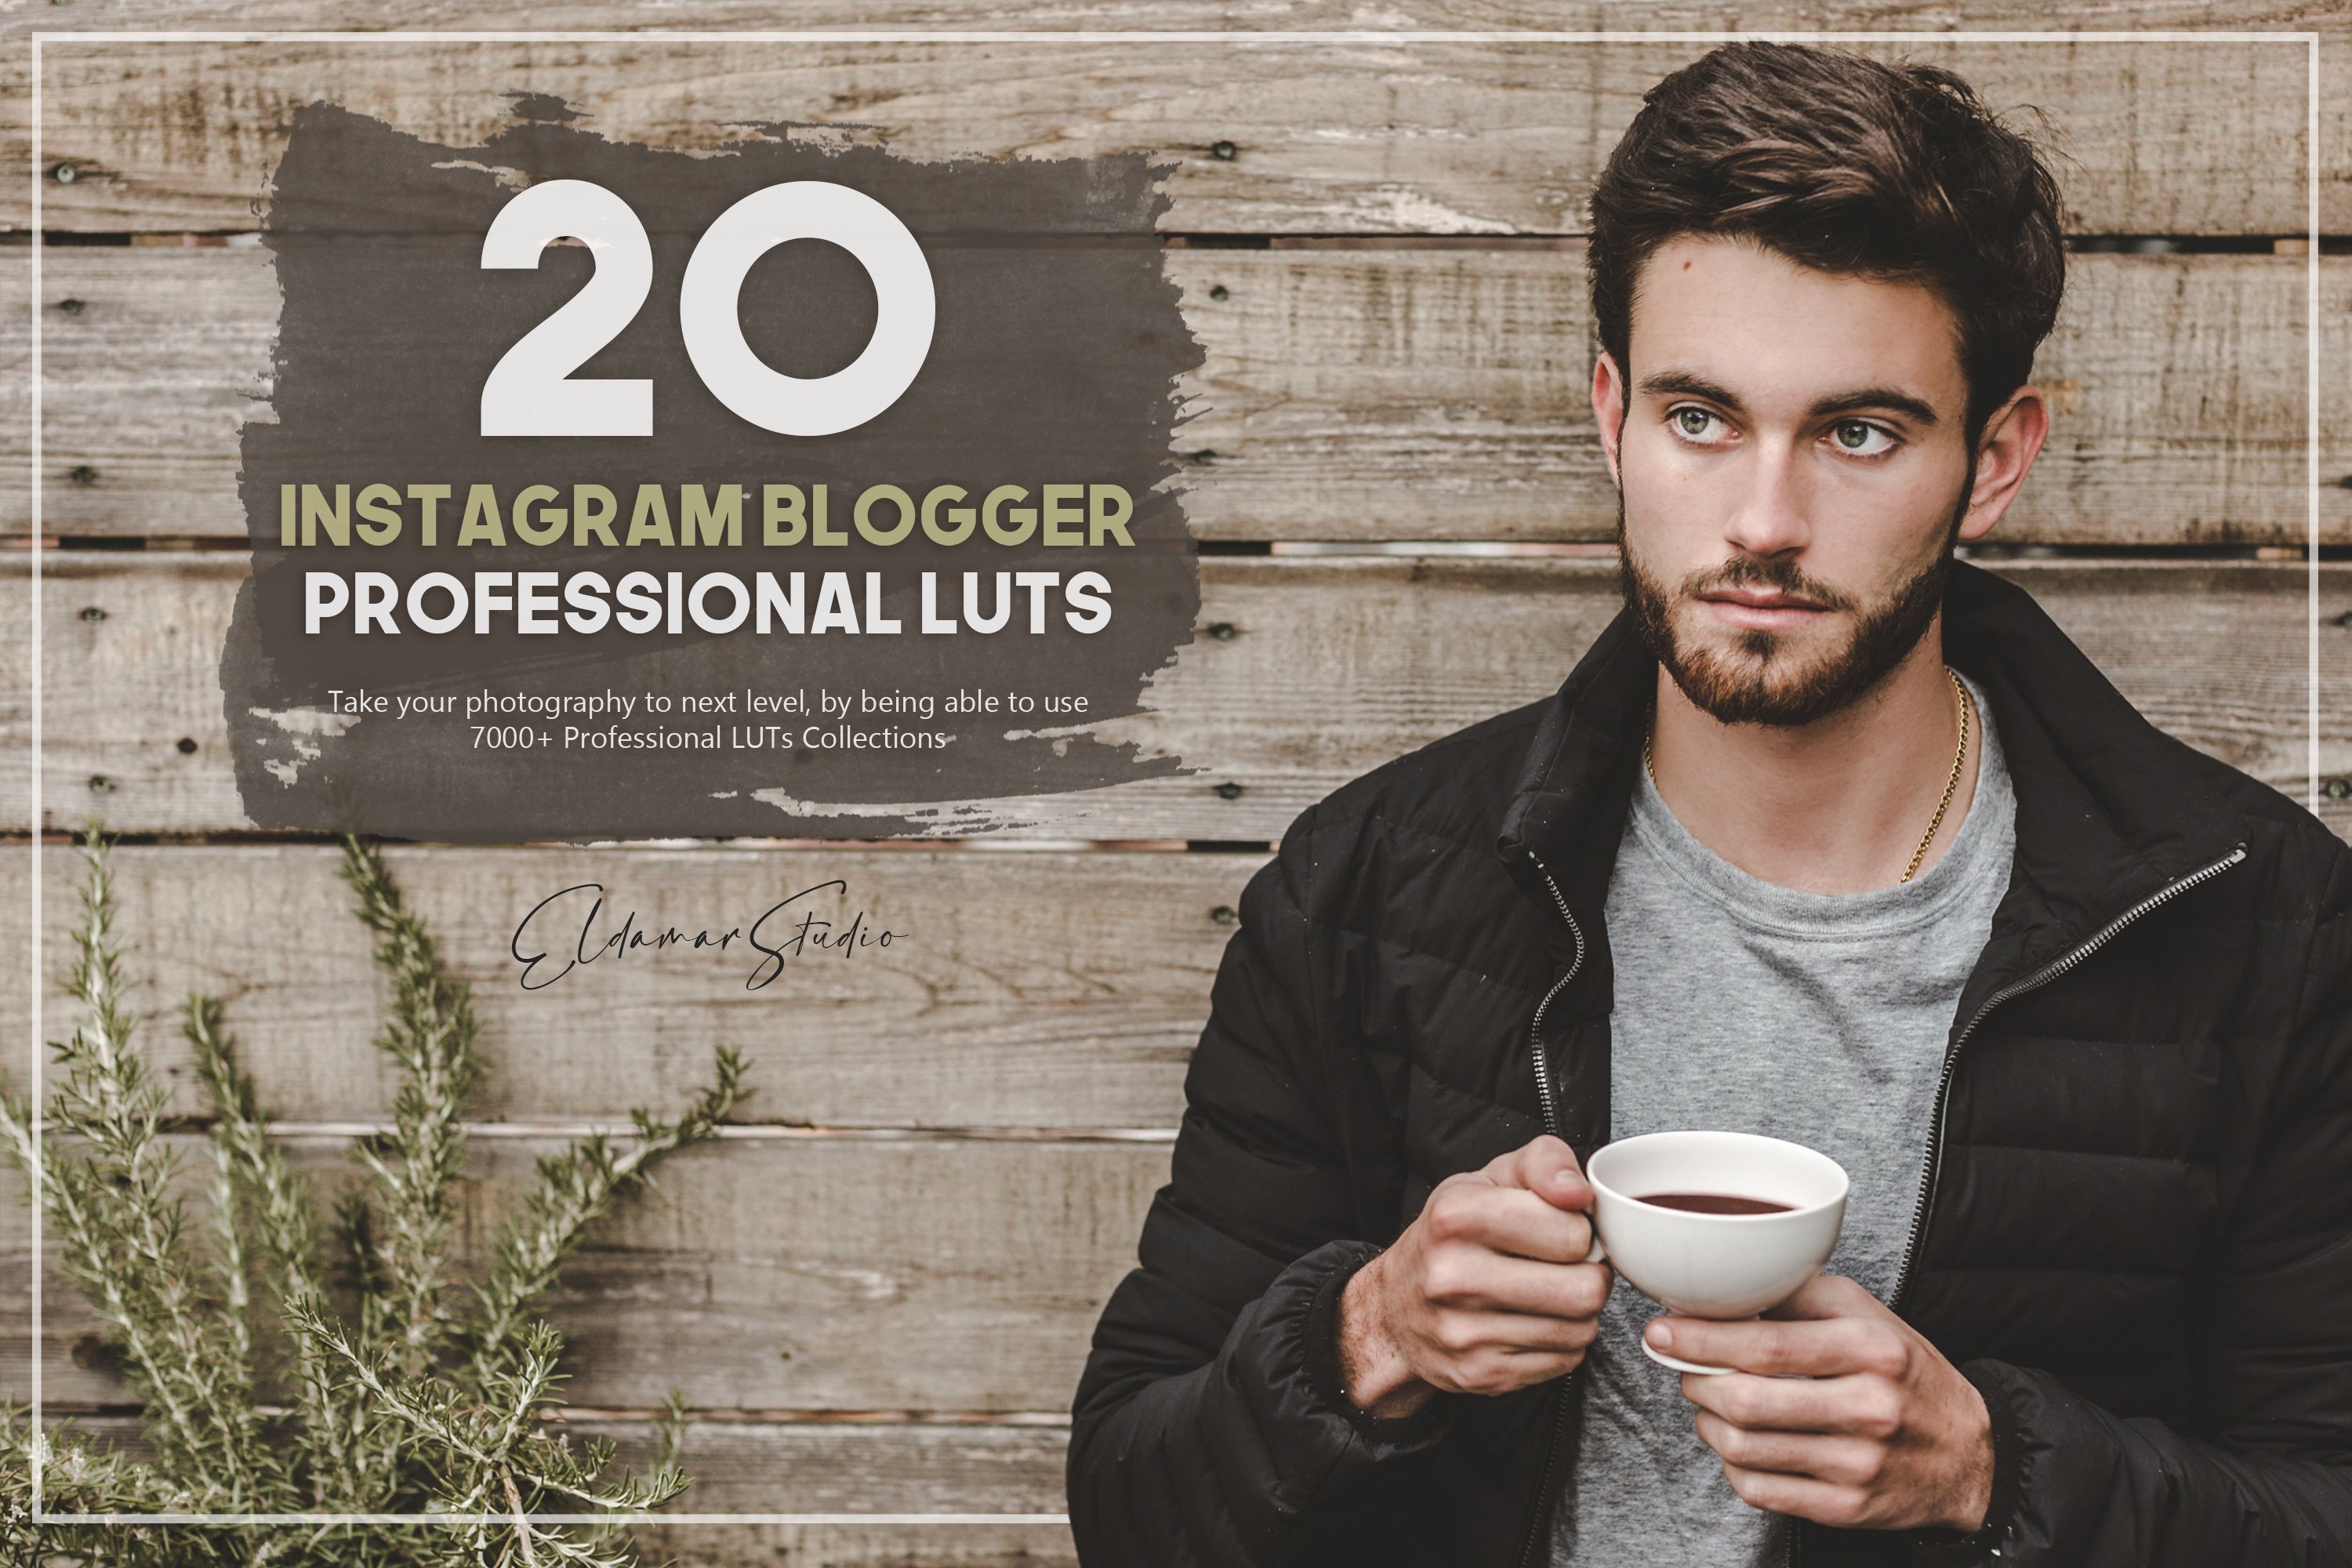 20 Instagram Blogger LUTs Packcover image.